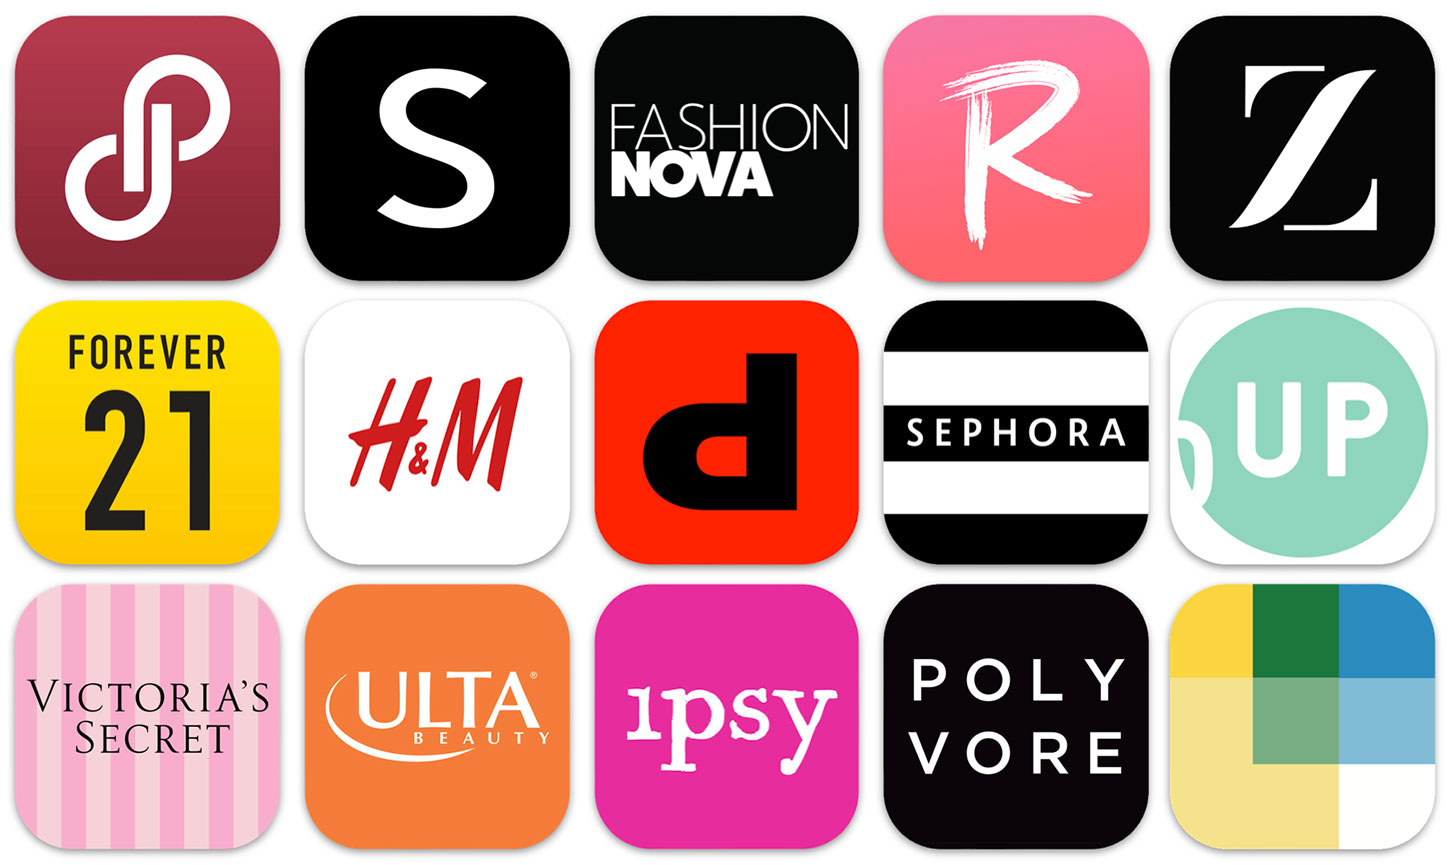 State of Shopping Apps Report: Top U.S. Clothes & Fashion Apps Banner Image